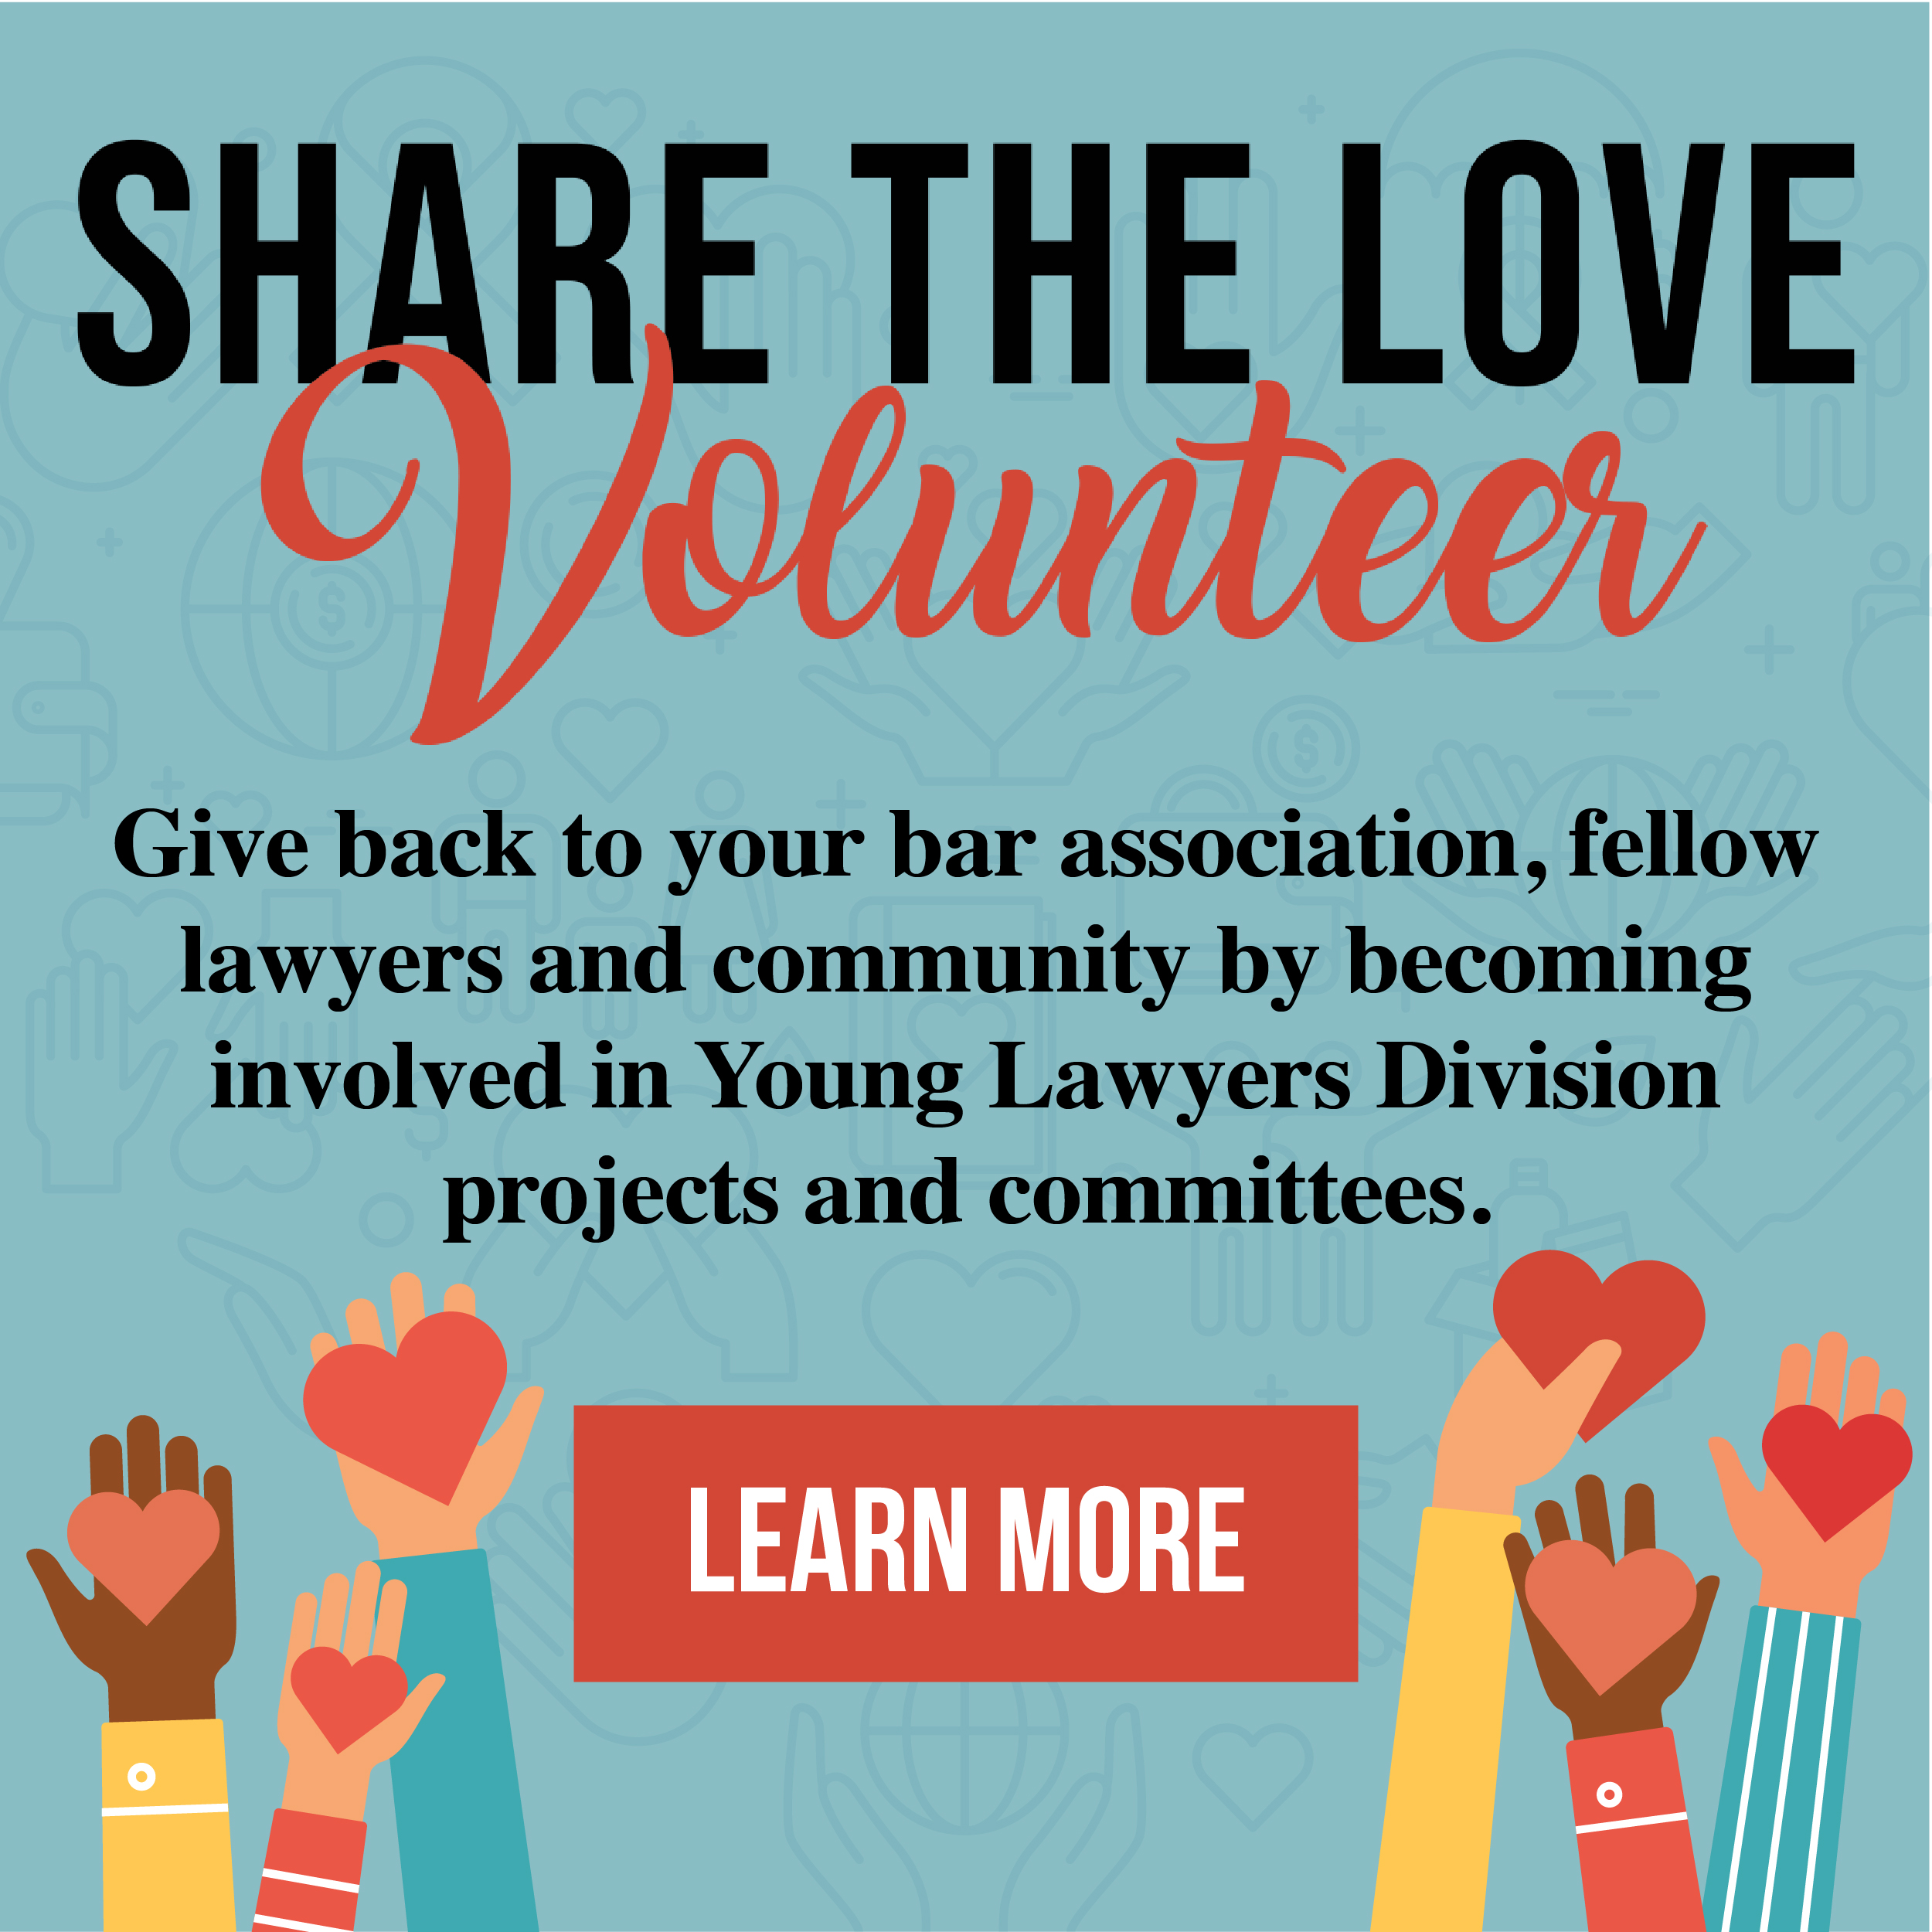 Give back to your bar association, fellow lawyers and community by getting involved in Young Lawyers Division projects and committees.